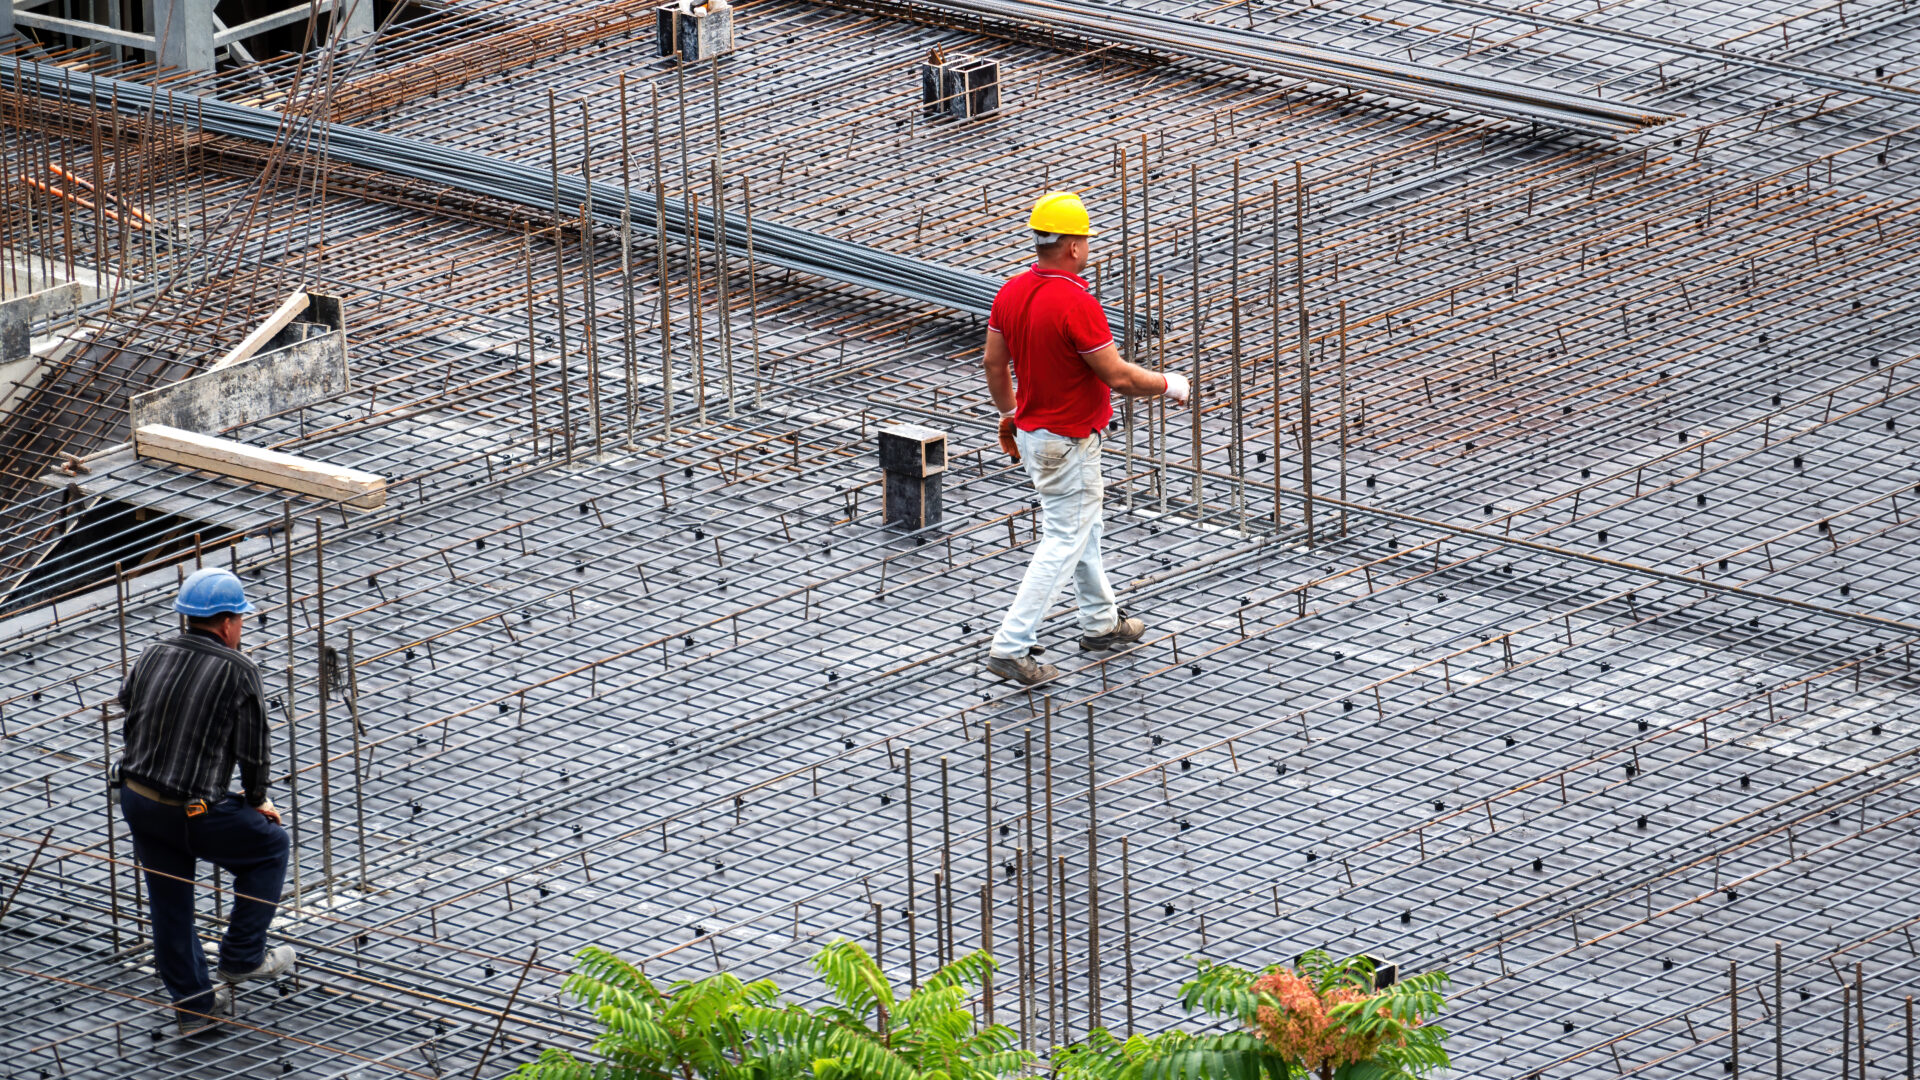 STEPS TO BE TAKEN FOR QUALITY CONTROL OF CONCRETE IN THE CONSTRUCTION INDUSTRY.